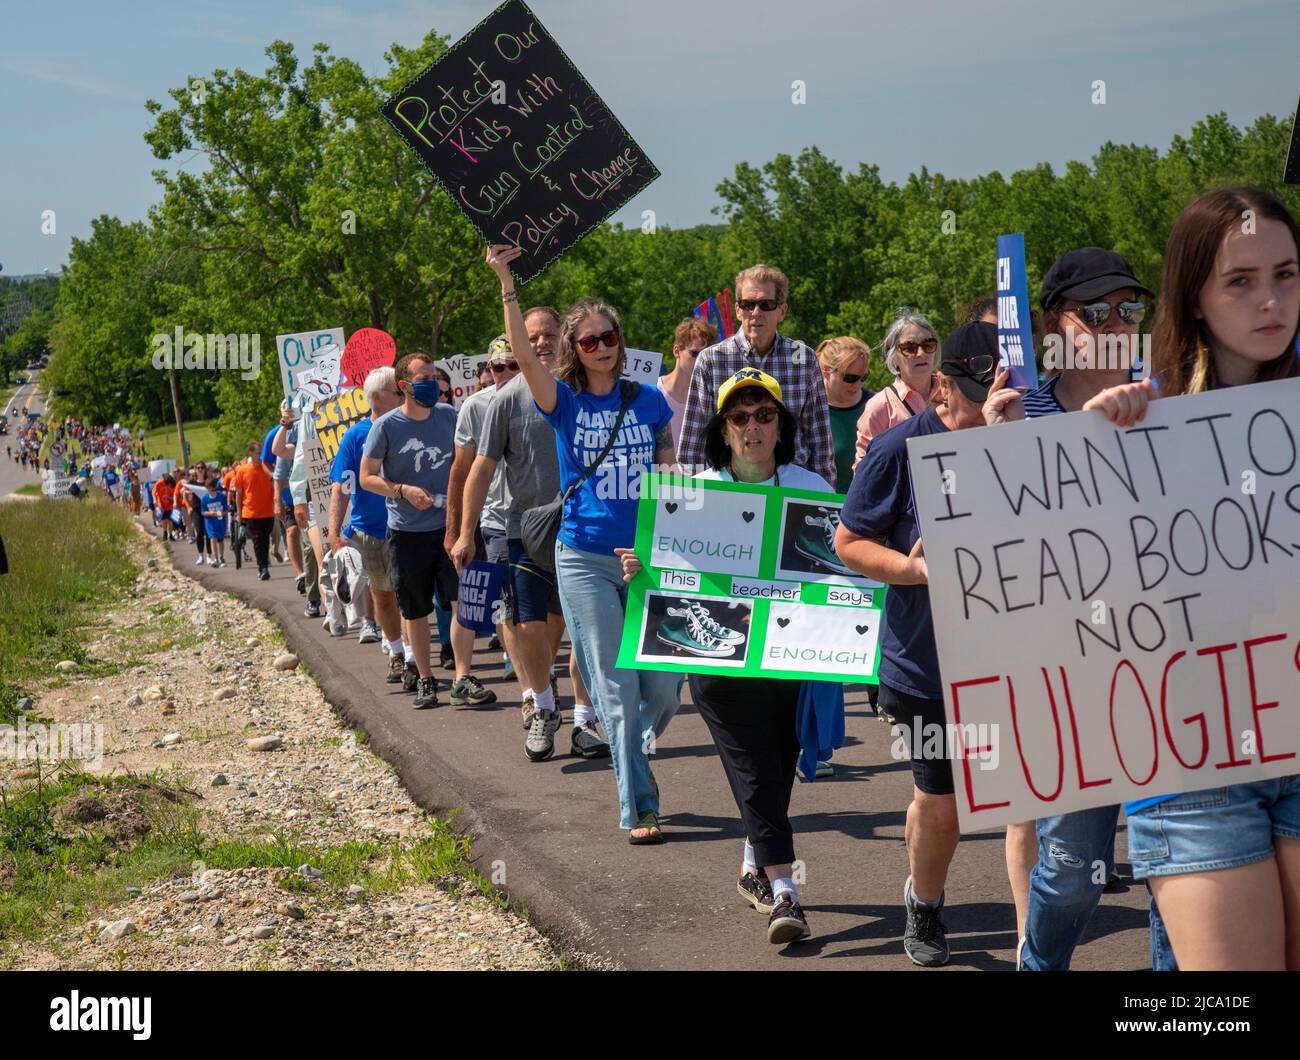 Oxford, Michigan, USA. 11th June, 2022. Hundreds rallied for tighter gun control laws in the town where four students were shot and killed at Oxford High School in November 2021. It was one of many rallies organized by March for Our Lives across the country protesting gun violence and mass shootings. The Oxford rally was organized by the student group No Future Without Today. Credit: Jim West/Alamy Live News Stock Photo